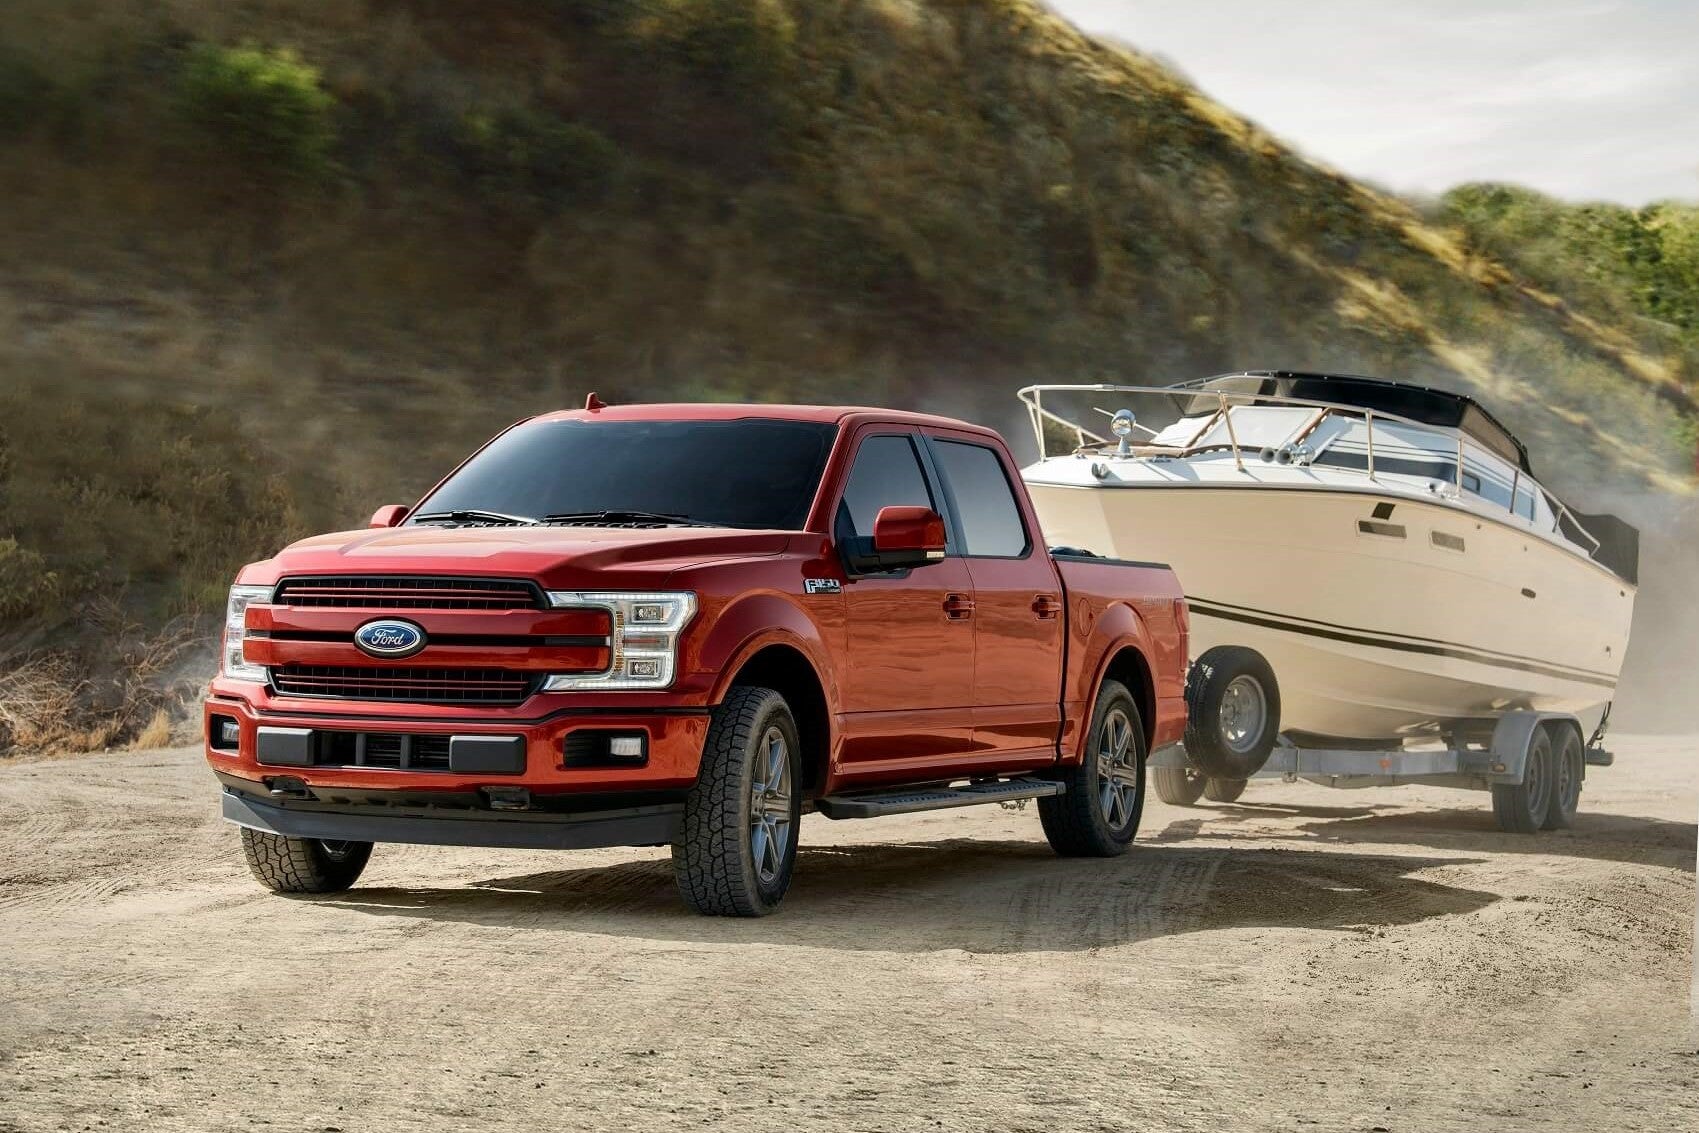 With a towing capacity of 14,000 pounds, a red Ford F-150 easily tows a boat